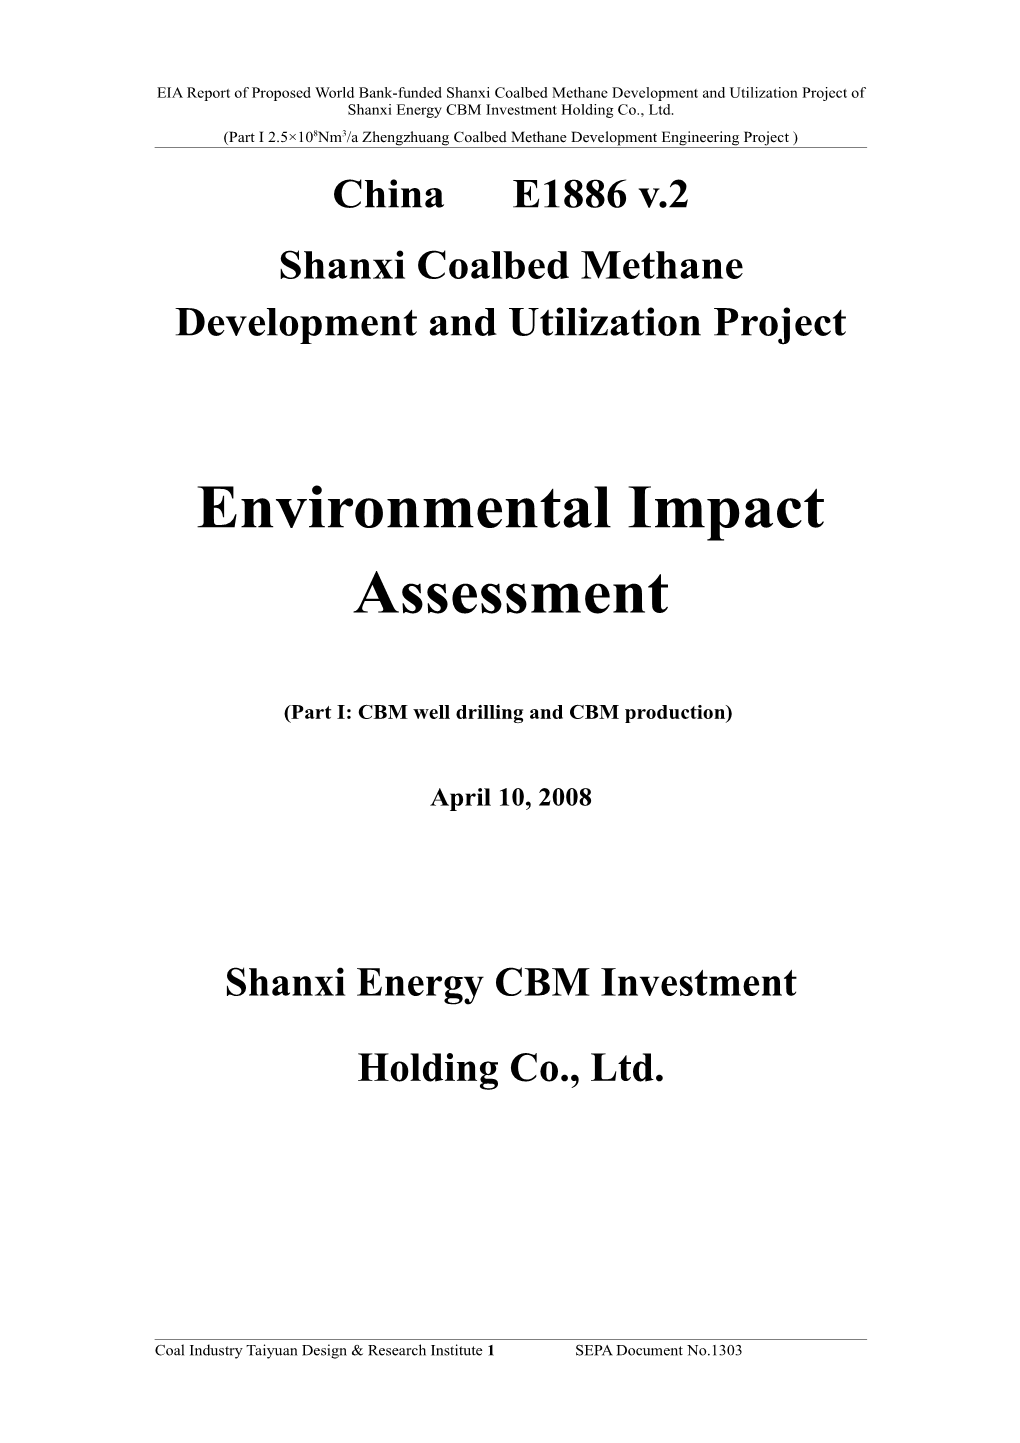 Shanxi Coalbed Methane Development and Utilization Project